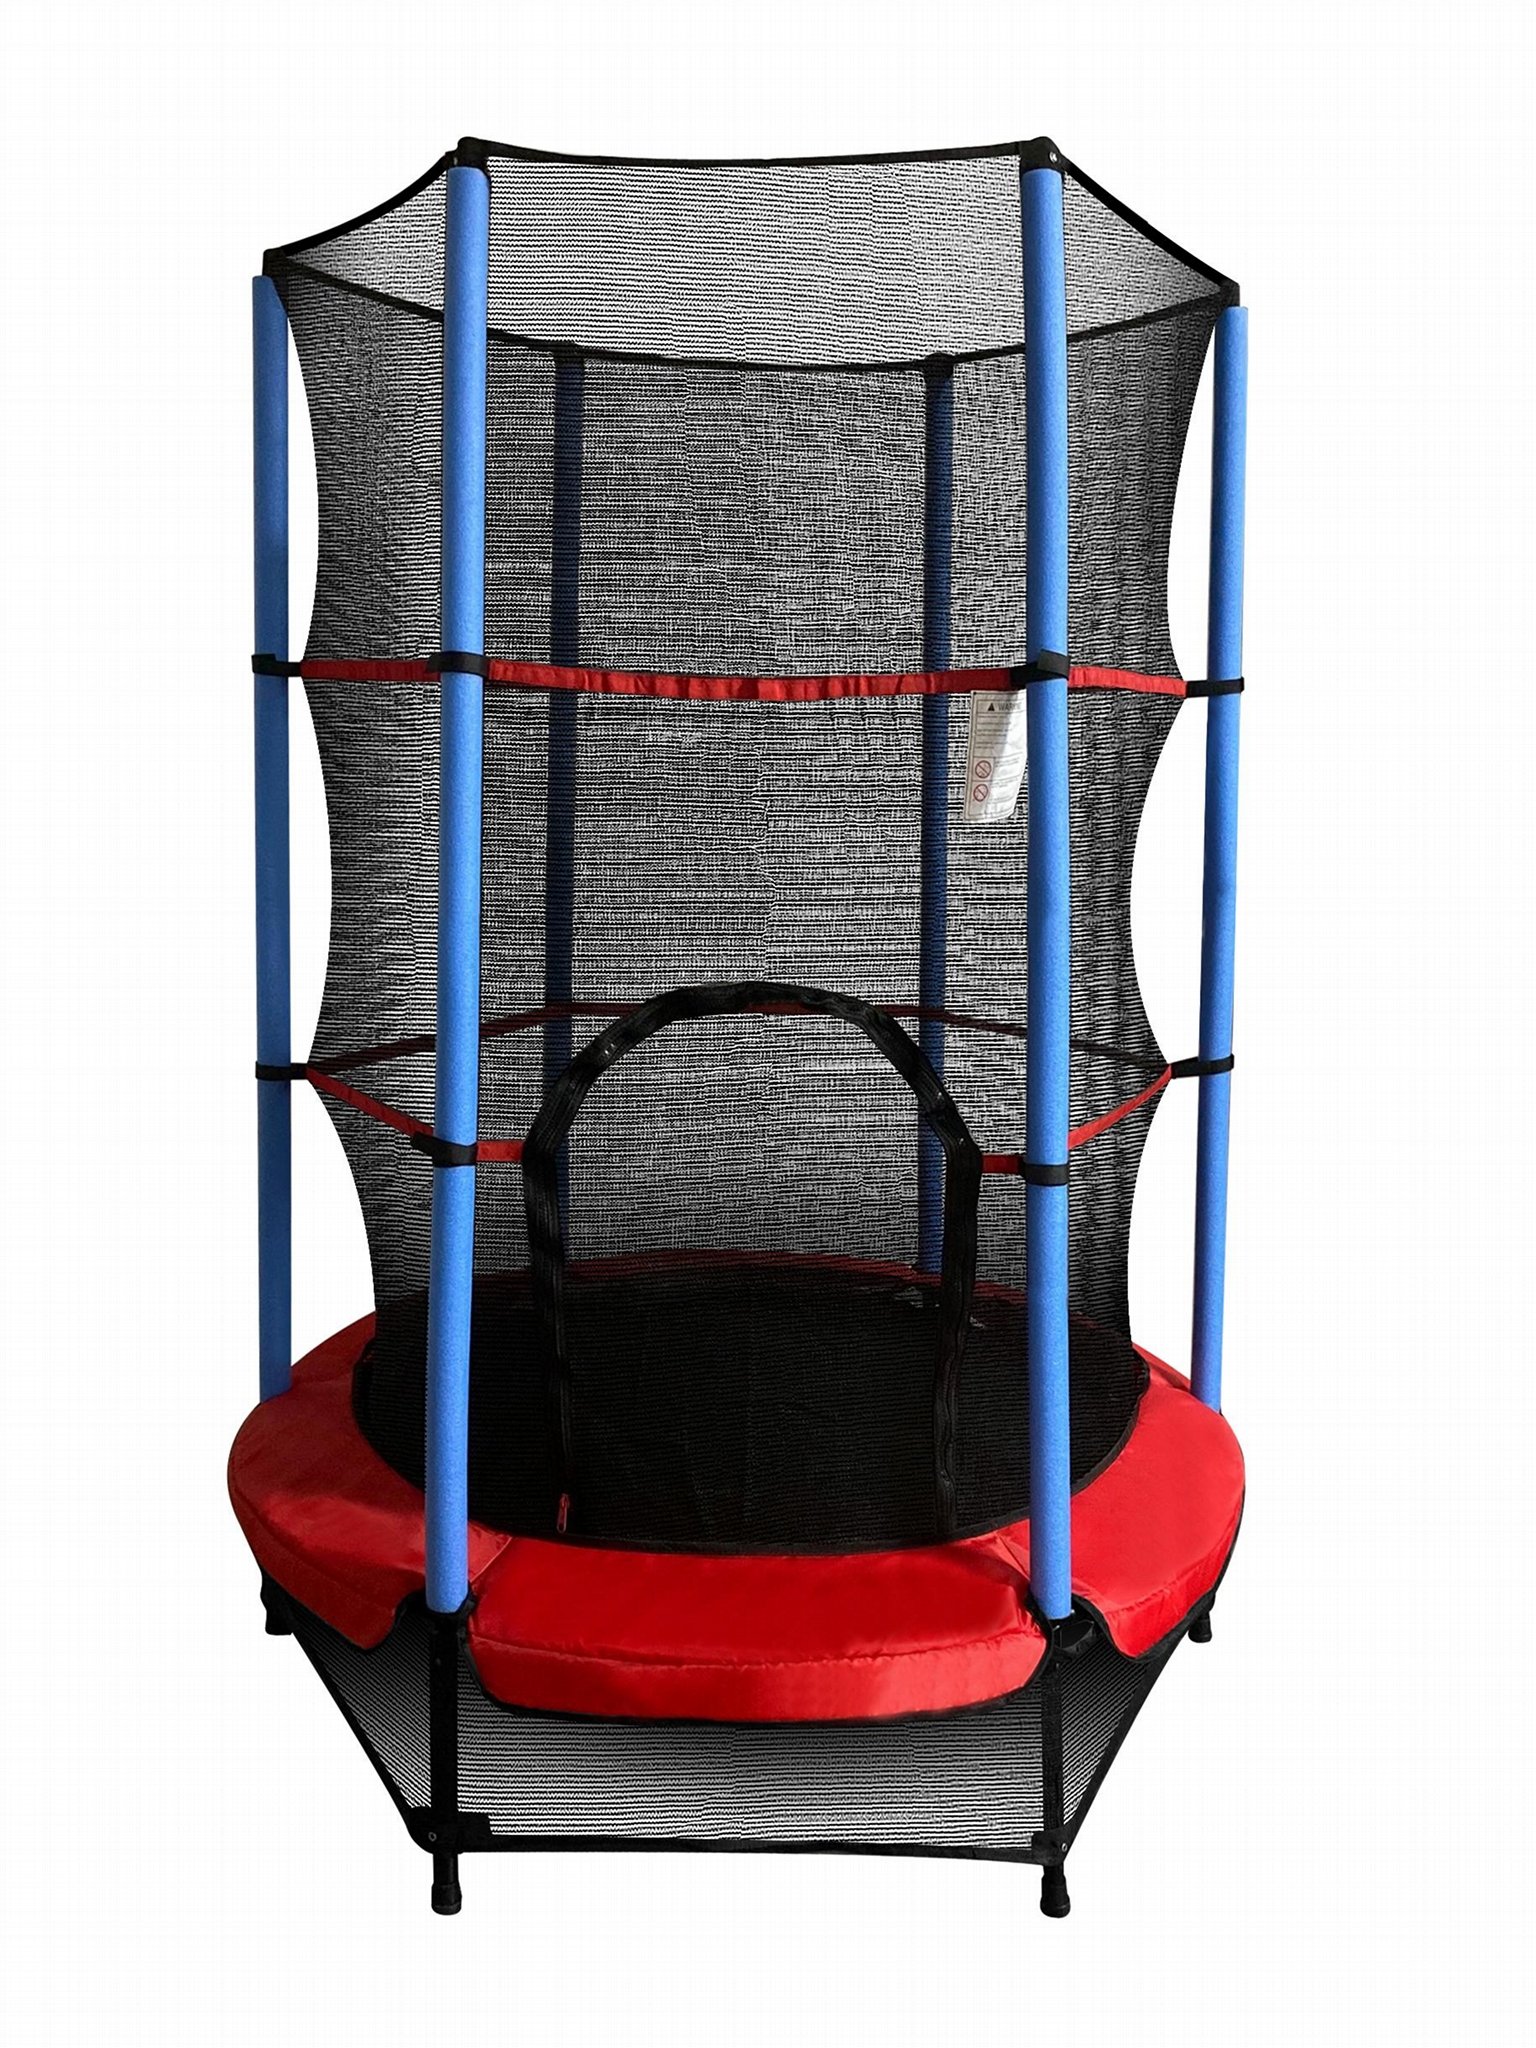 Hot sale 54 inch indoor trampoline with safety net for kids  4